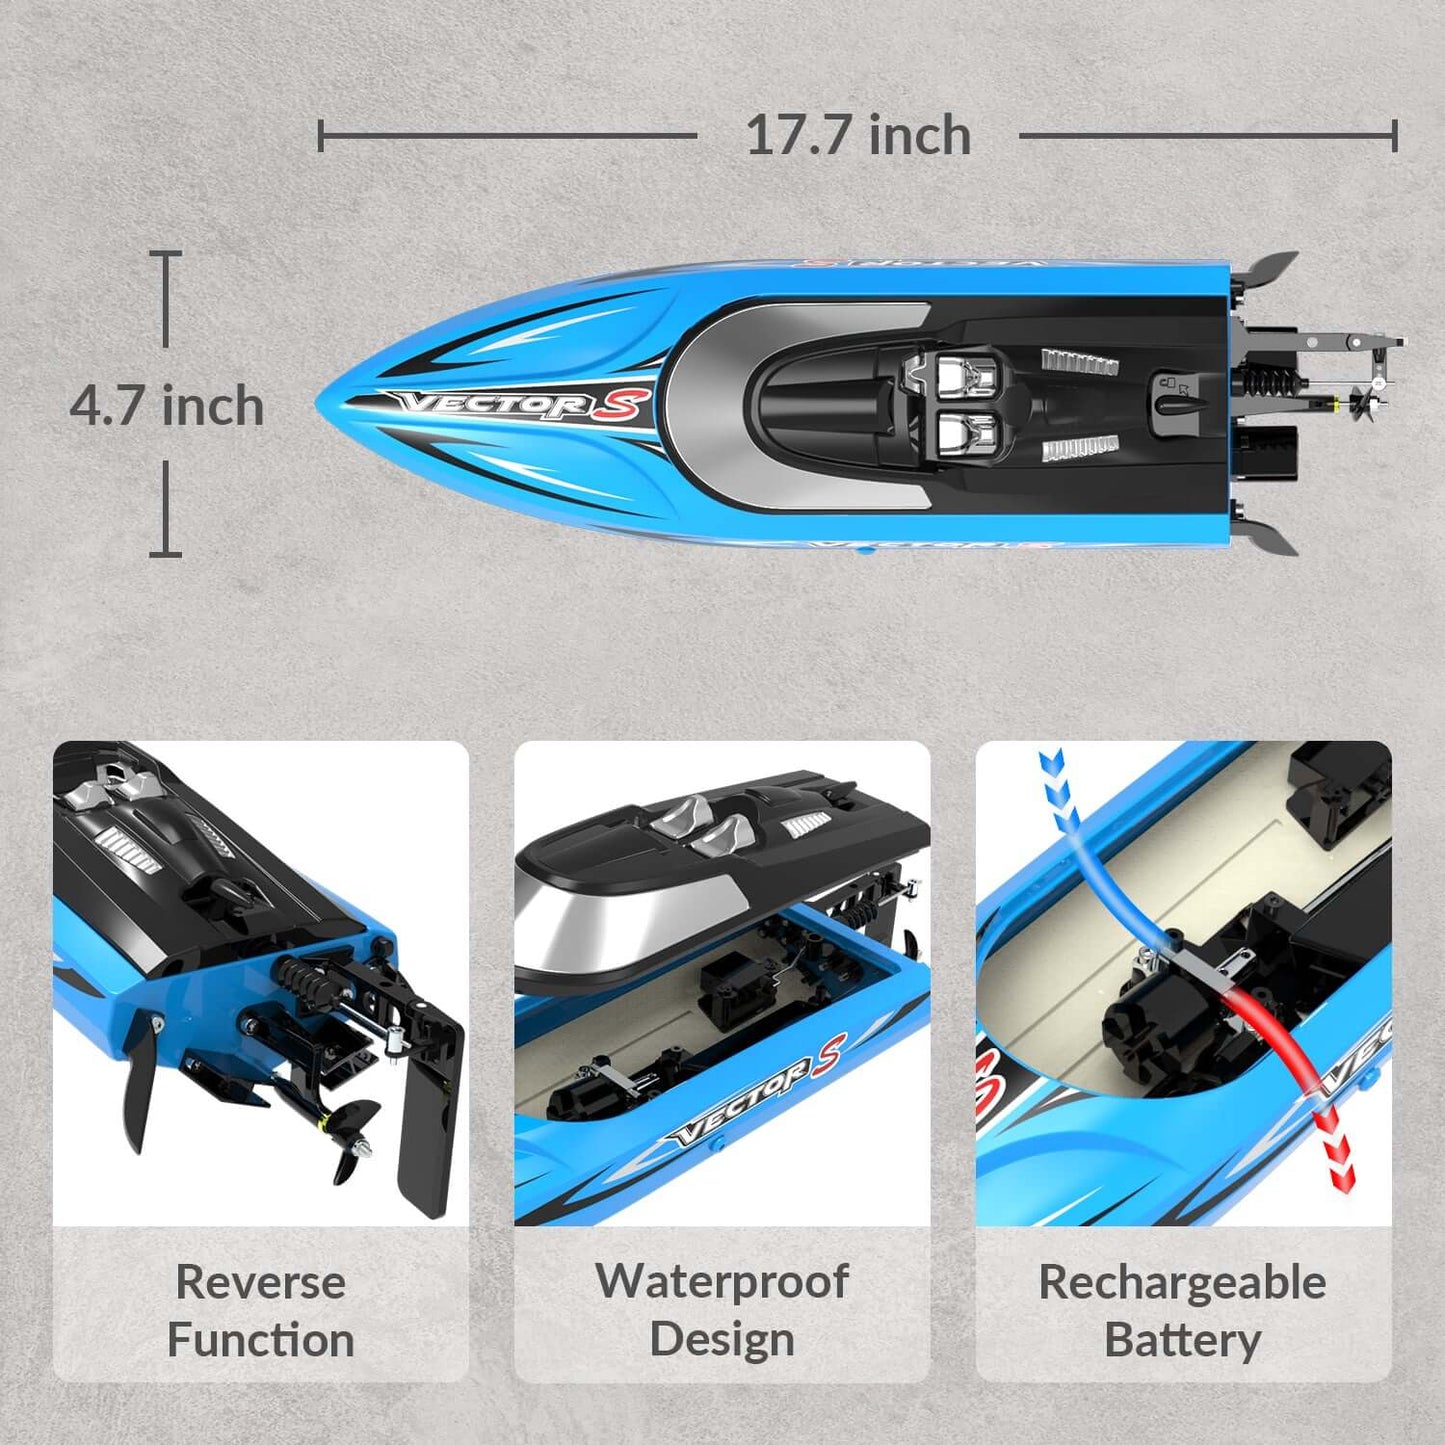 VectorS 30MPH Brushless RC Boat | VOLANTEXRC | KIDS TOY LOVER